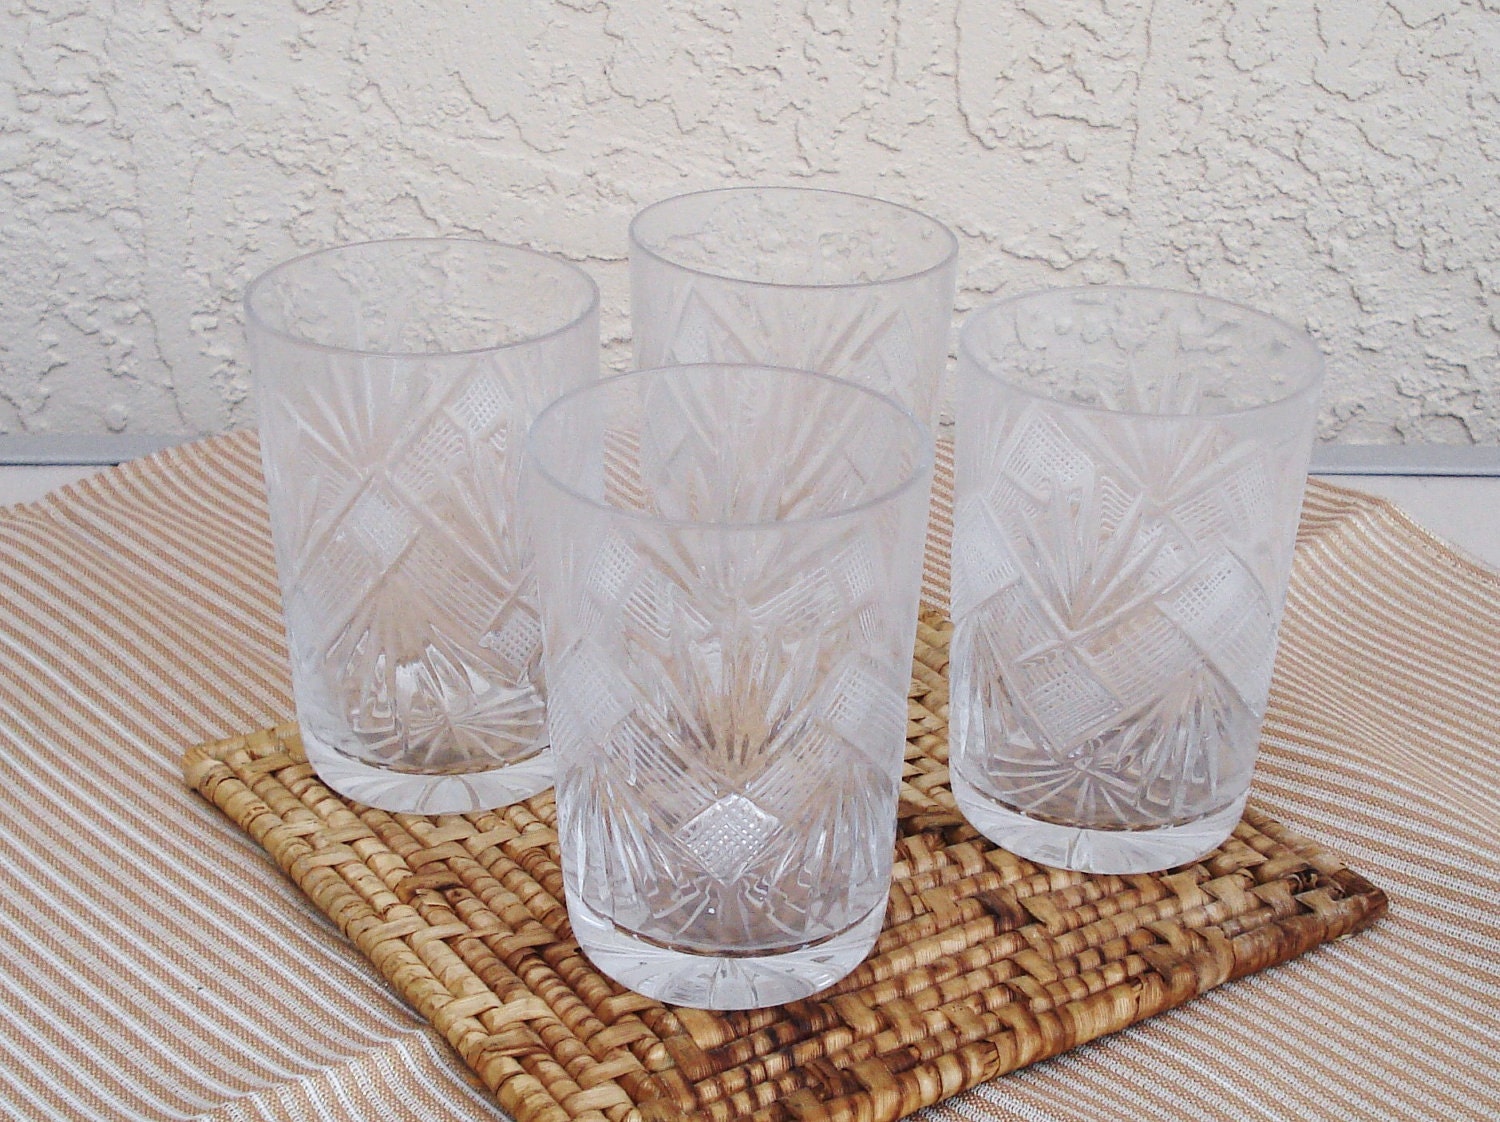 Luxbe Crystal Wine Glasses Set of 4 650mL